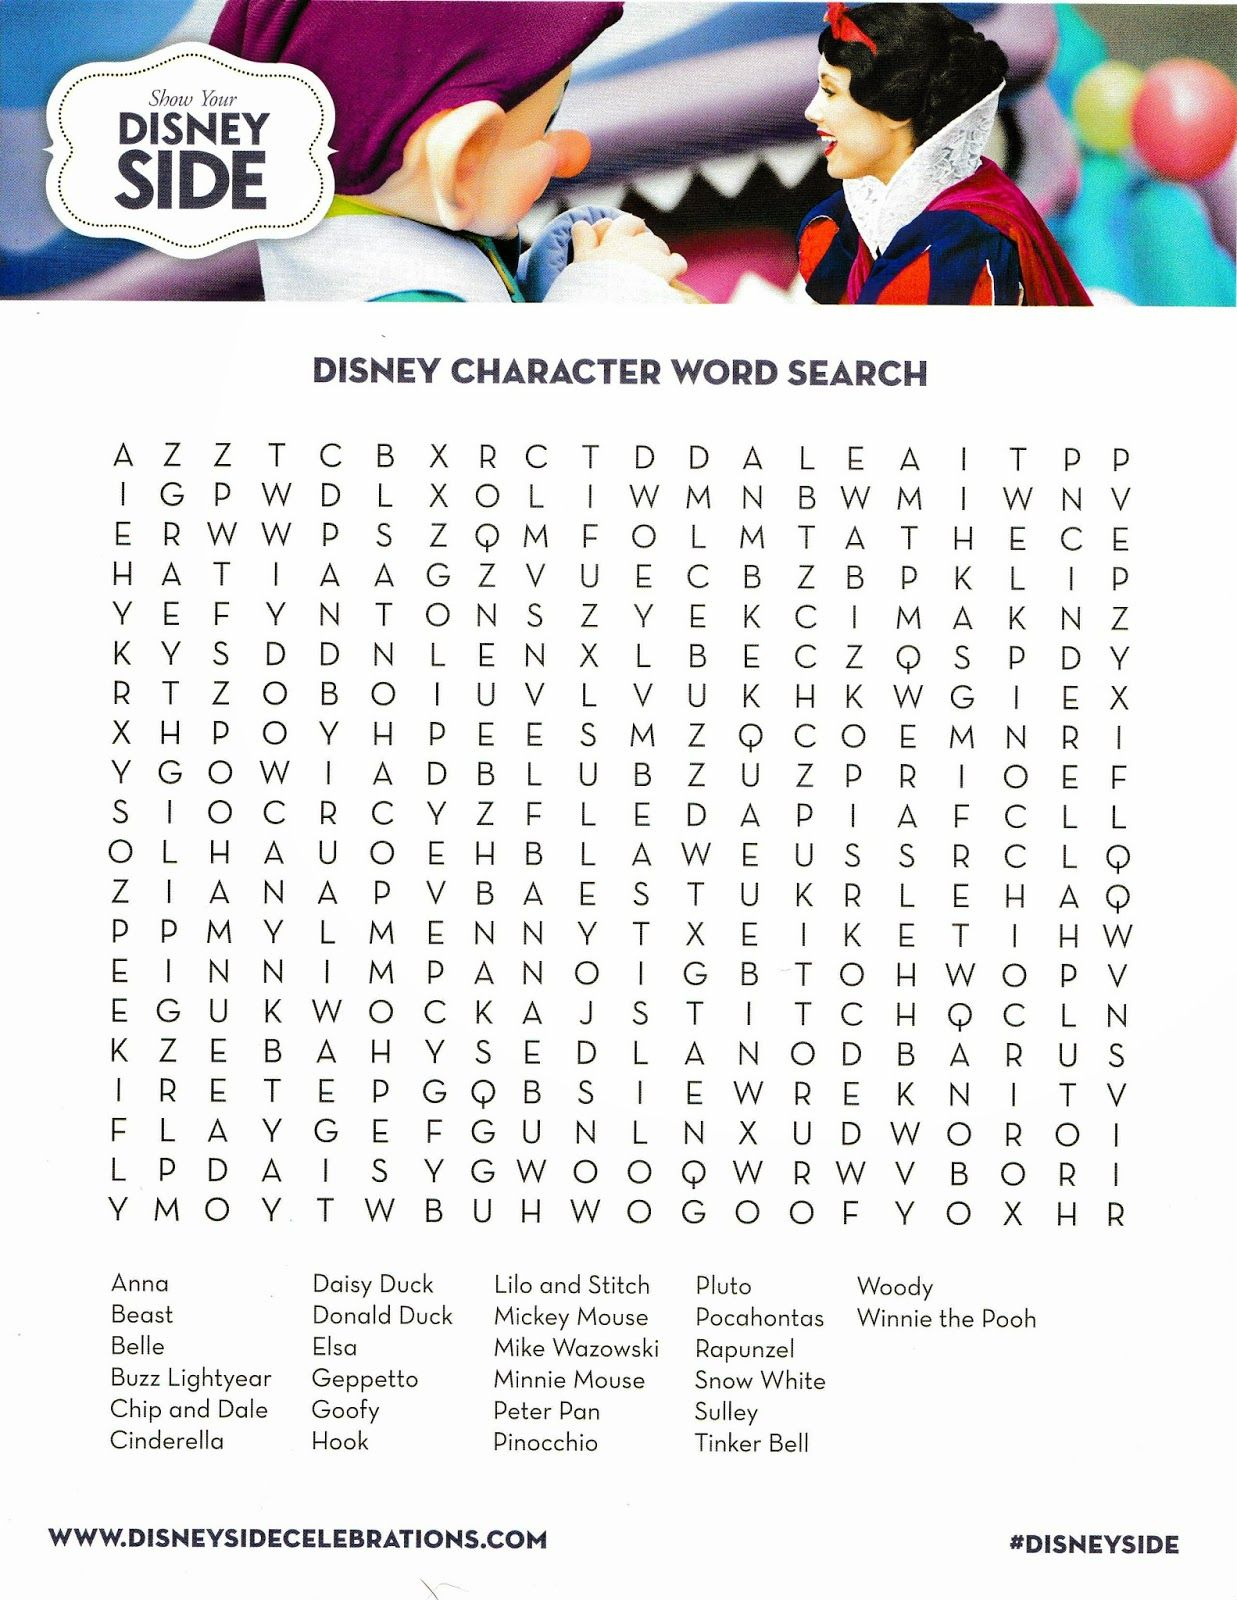 How To Host A Fabulous Disney Side @home Celebration pertaining to Disney Word Search Printable